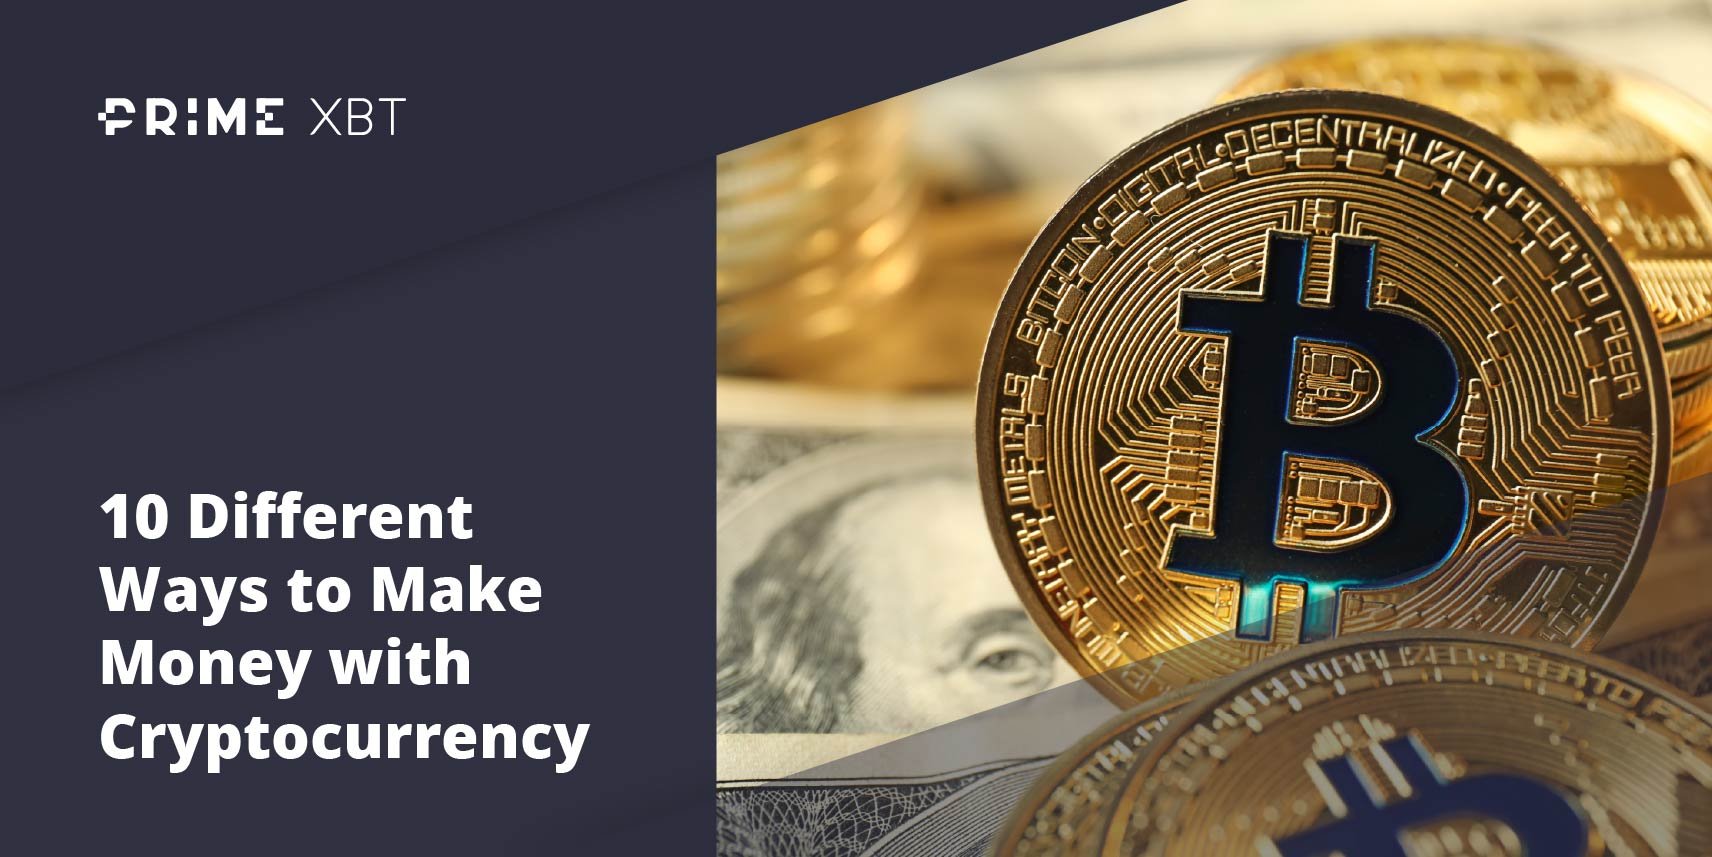 10 Different Ways to Make Money with Cryptocurrency - 2020 03 06 17.19.23